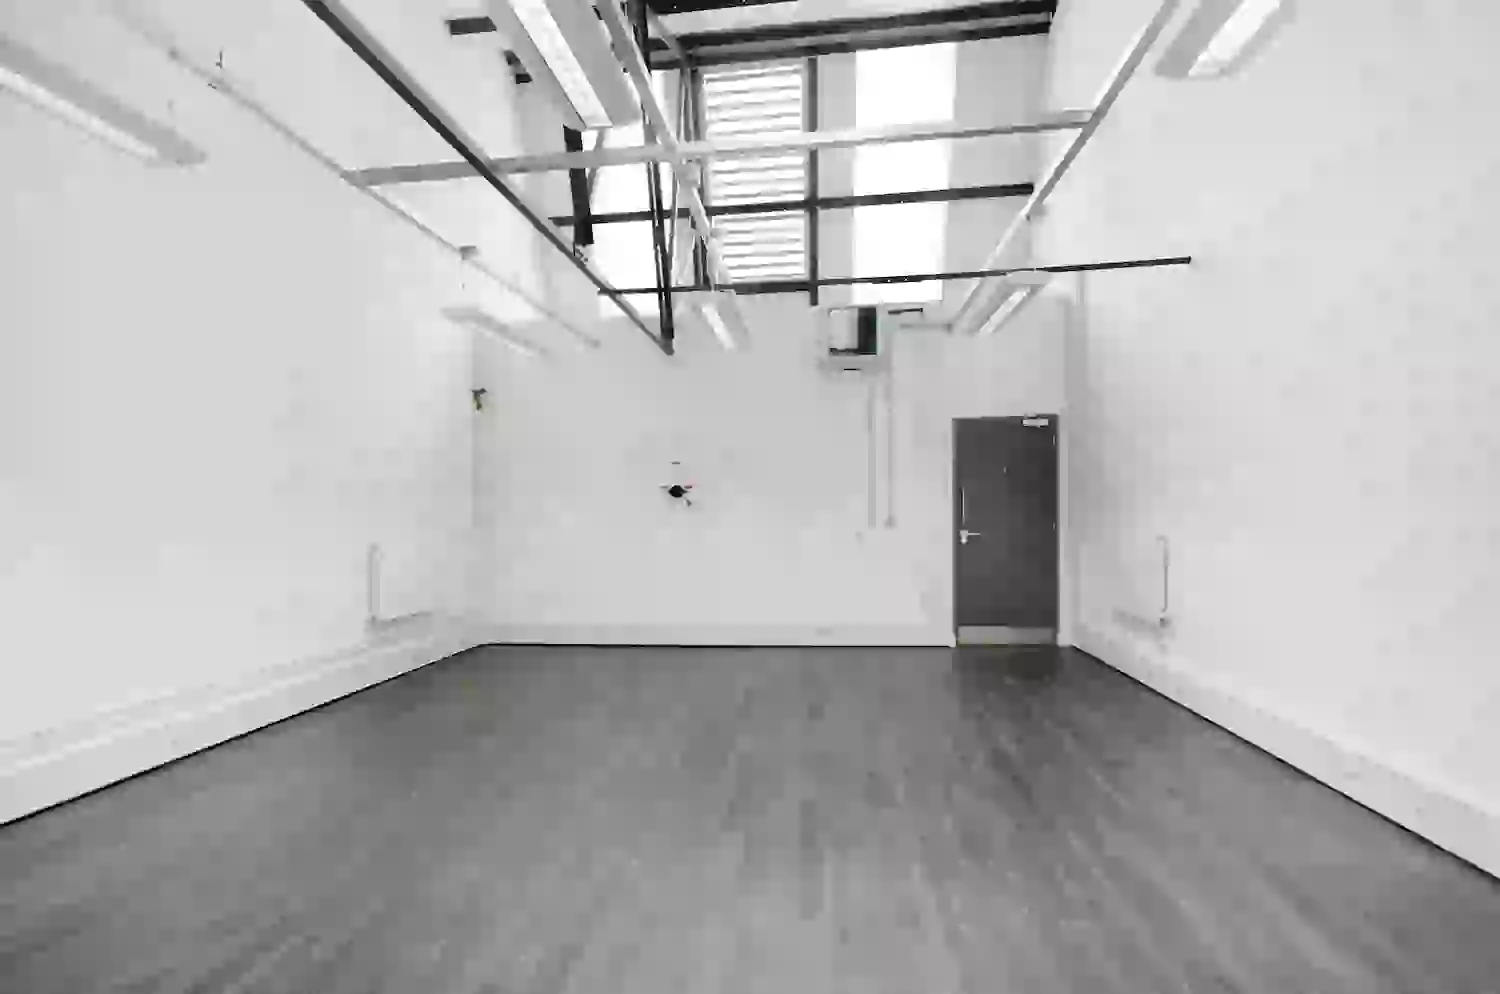 Office space to rent at The Light Box, 111 Power Road, Chiswick, London, unit PC.122, 398 sq ft (36 sq m).